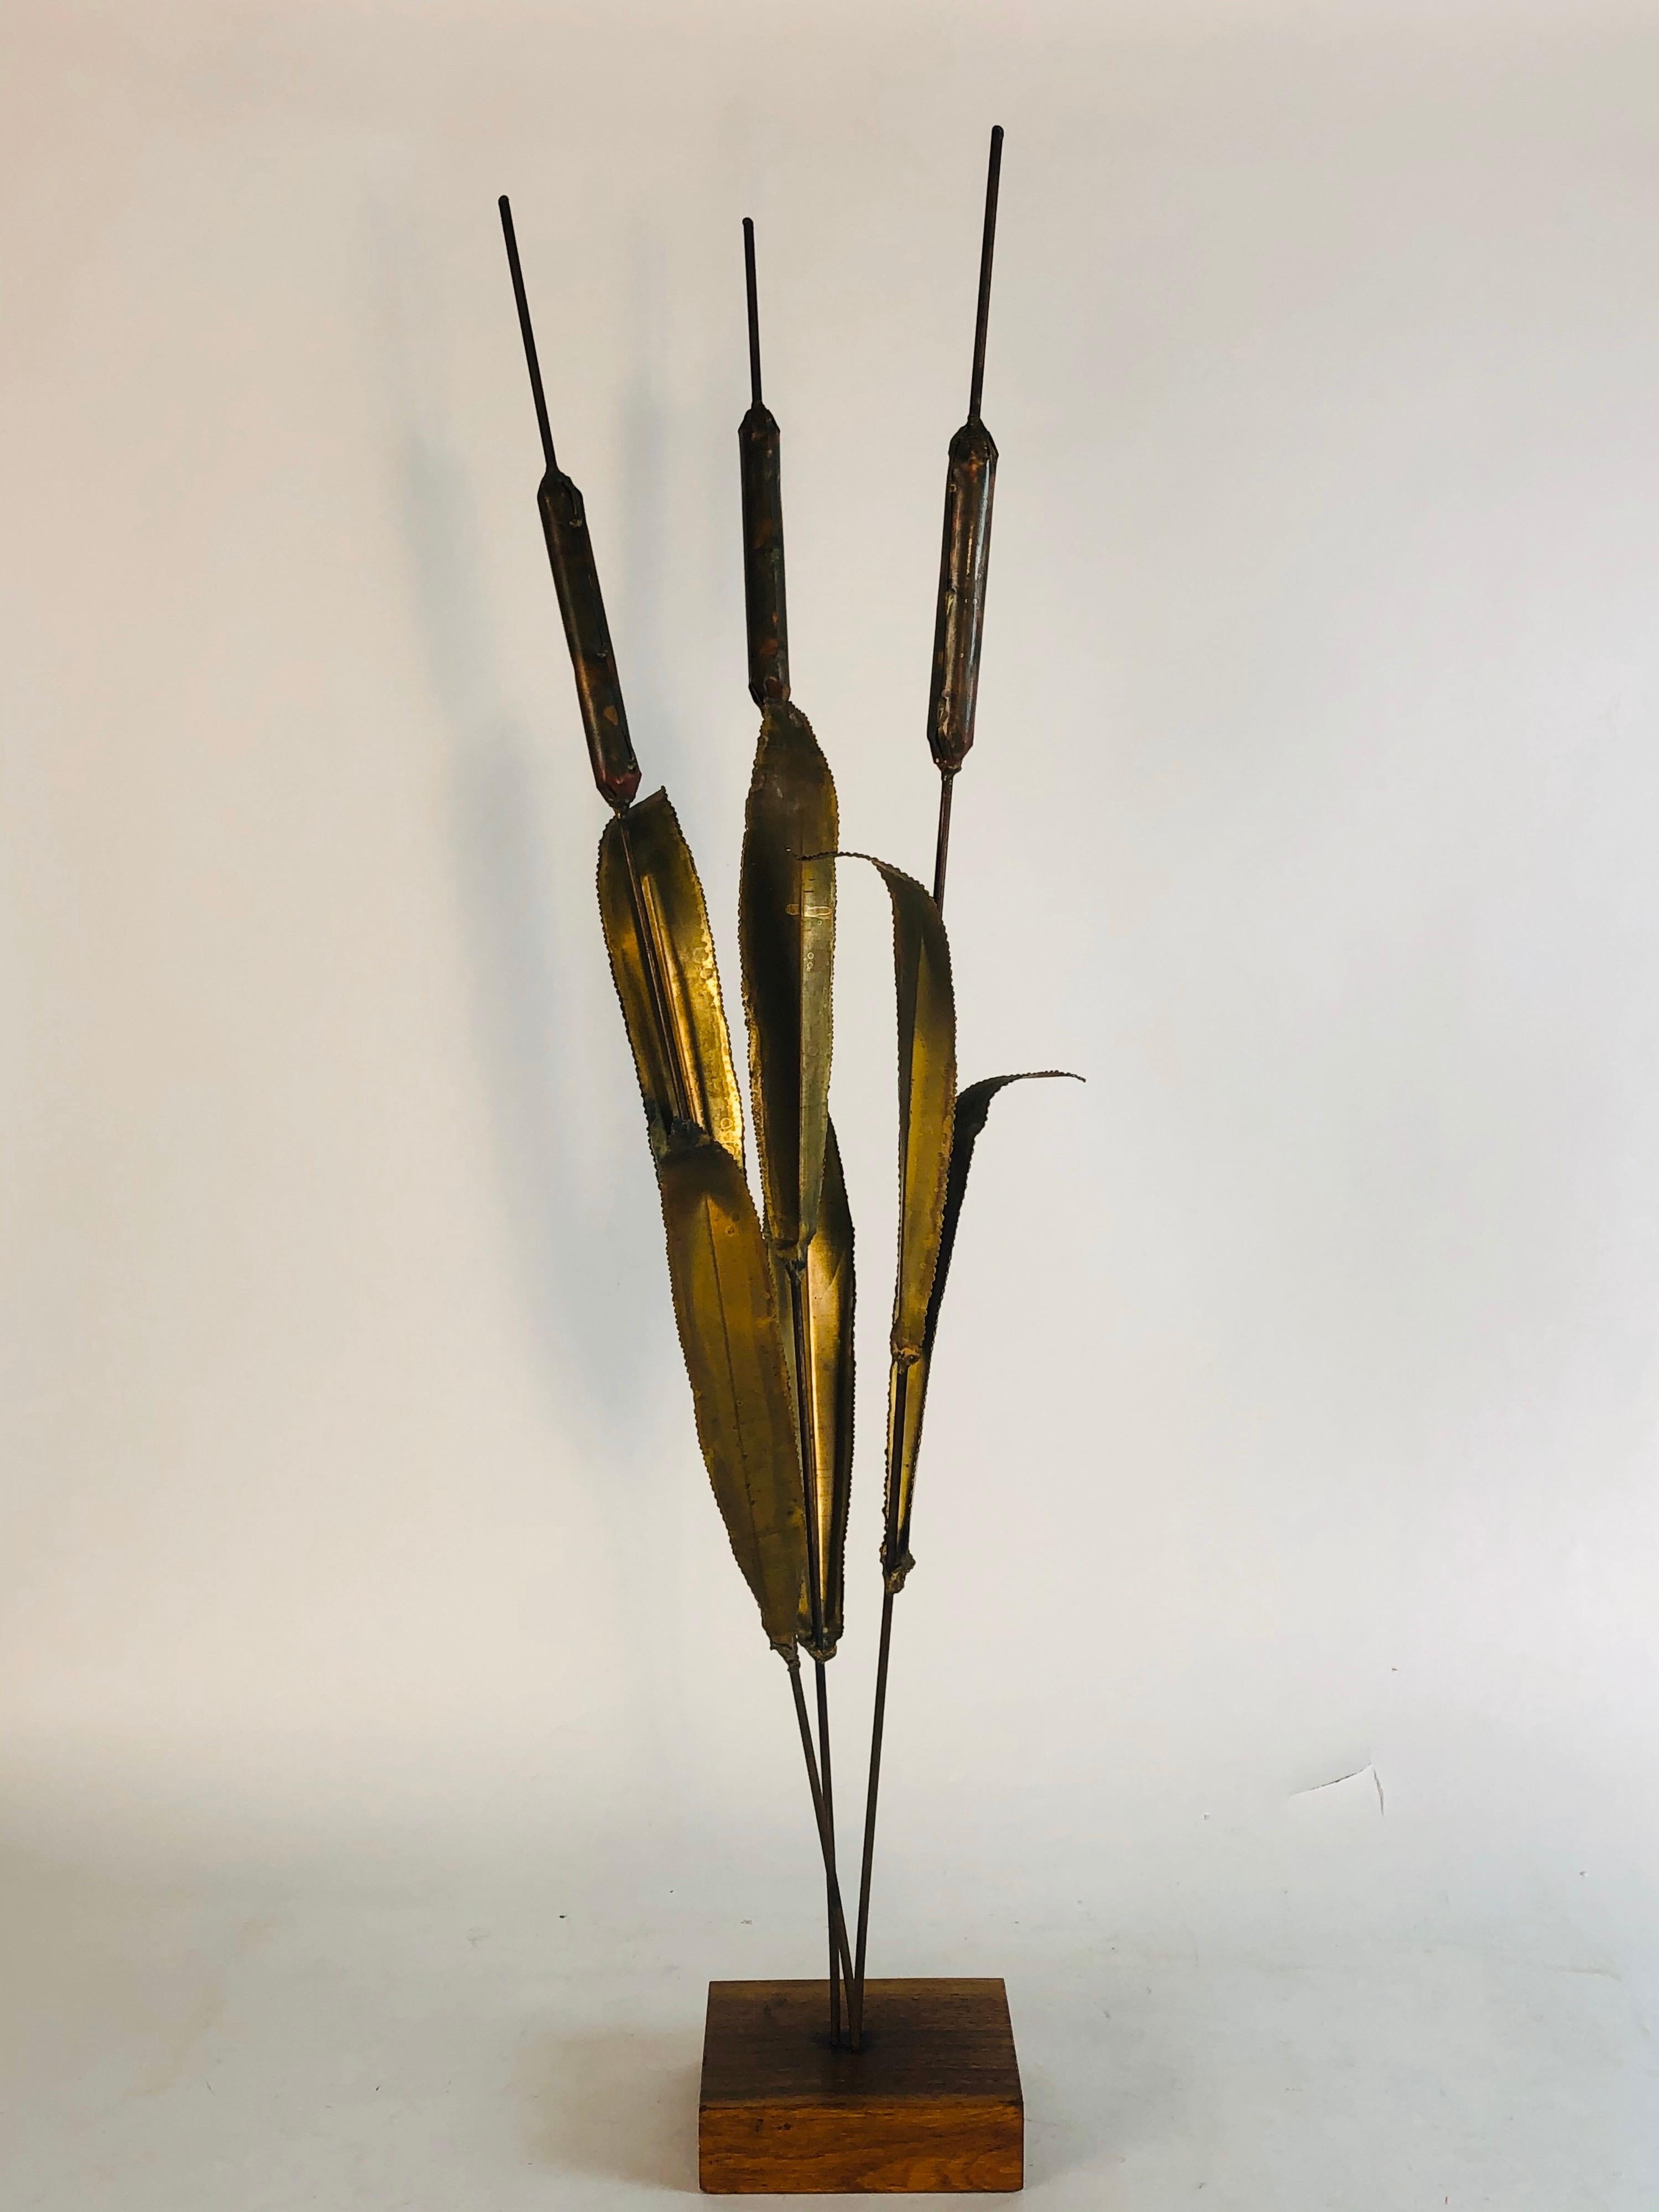 1970s tall table top metal Cat Tail sculpture on a wood block. Unsigned but beautifully crafted metal pieces.